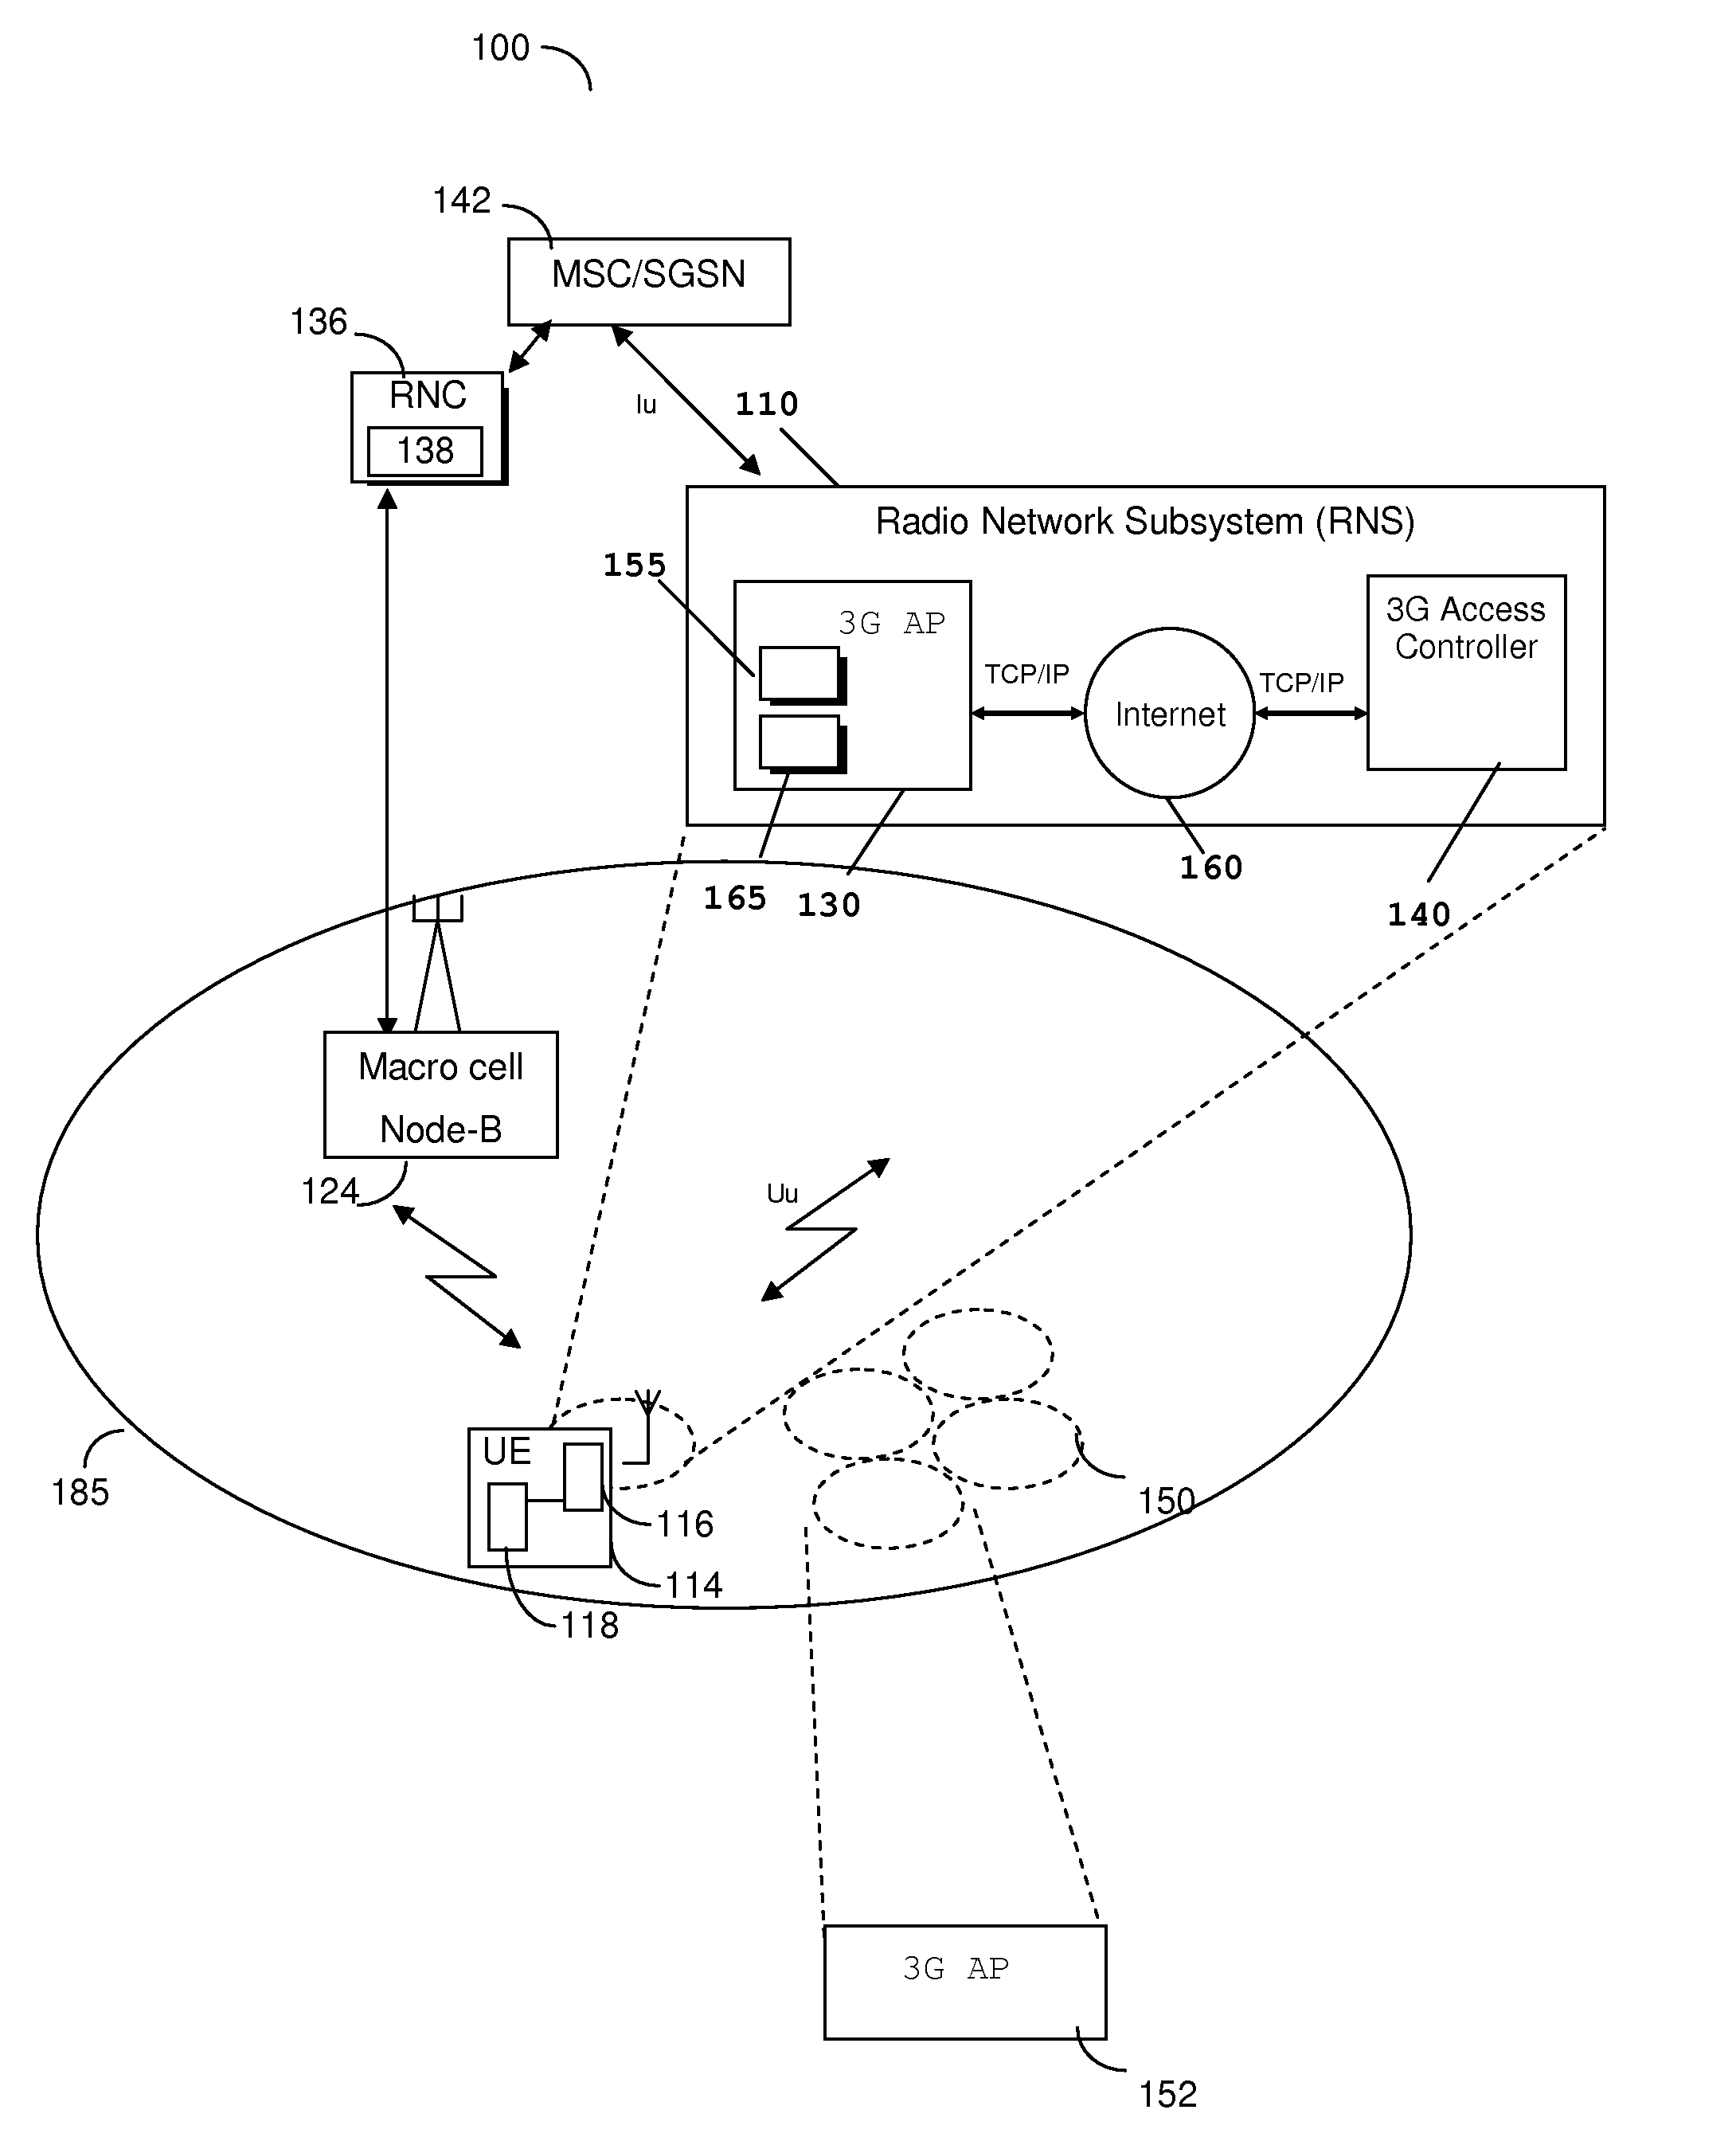 Method and apparatus for obtaining an address associated with a neighbouring cell of a cellular communication network